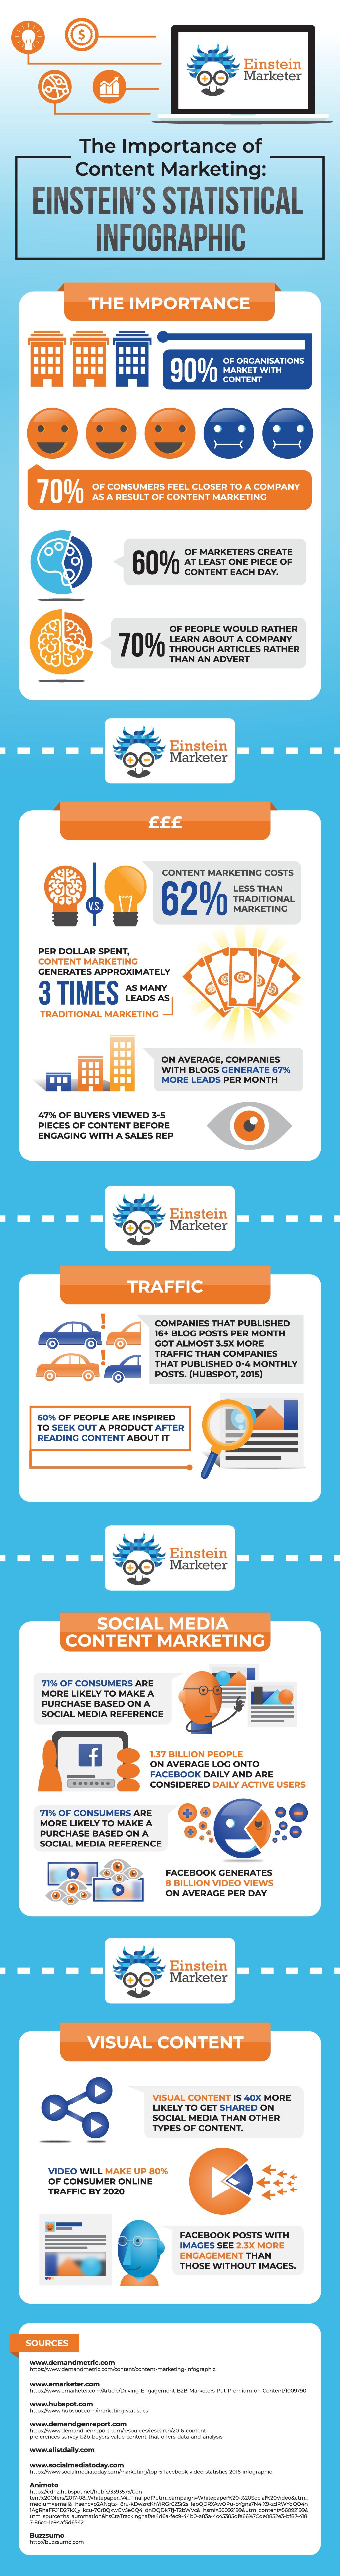 Content Marketing infographic statistics and numbers